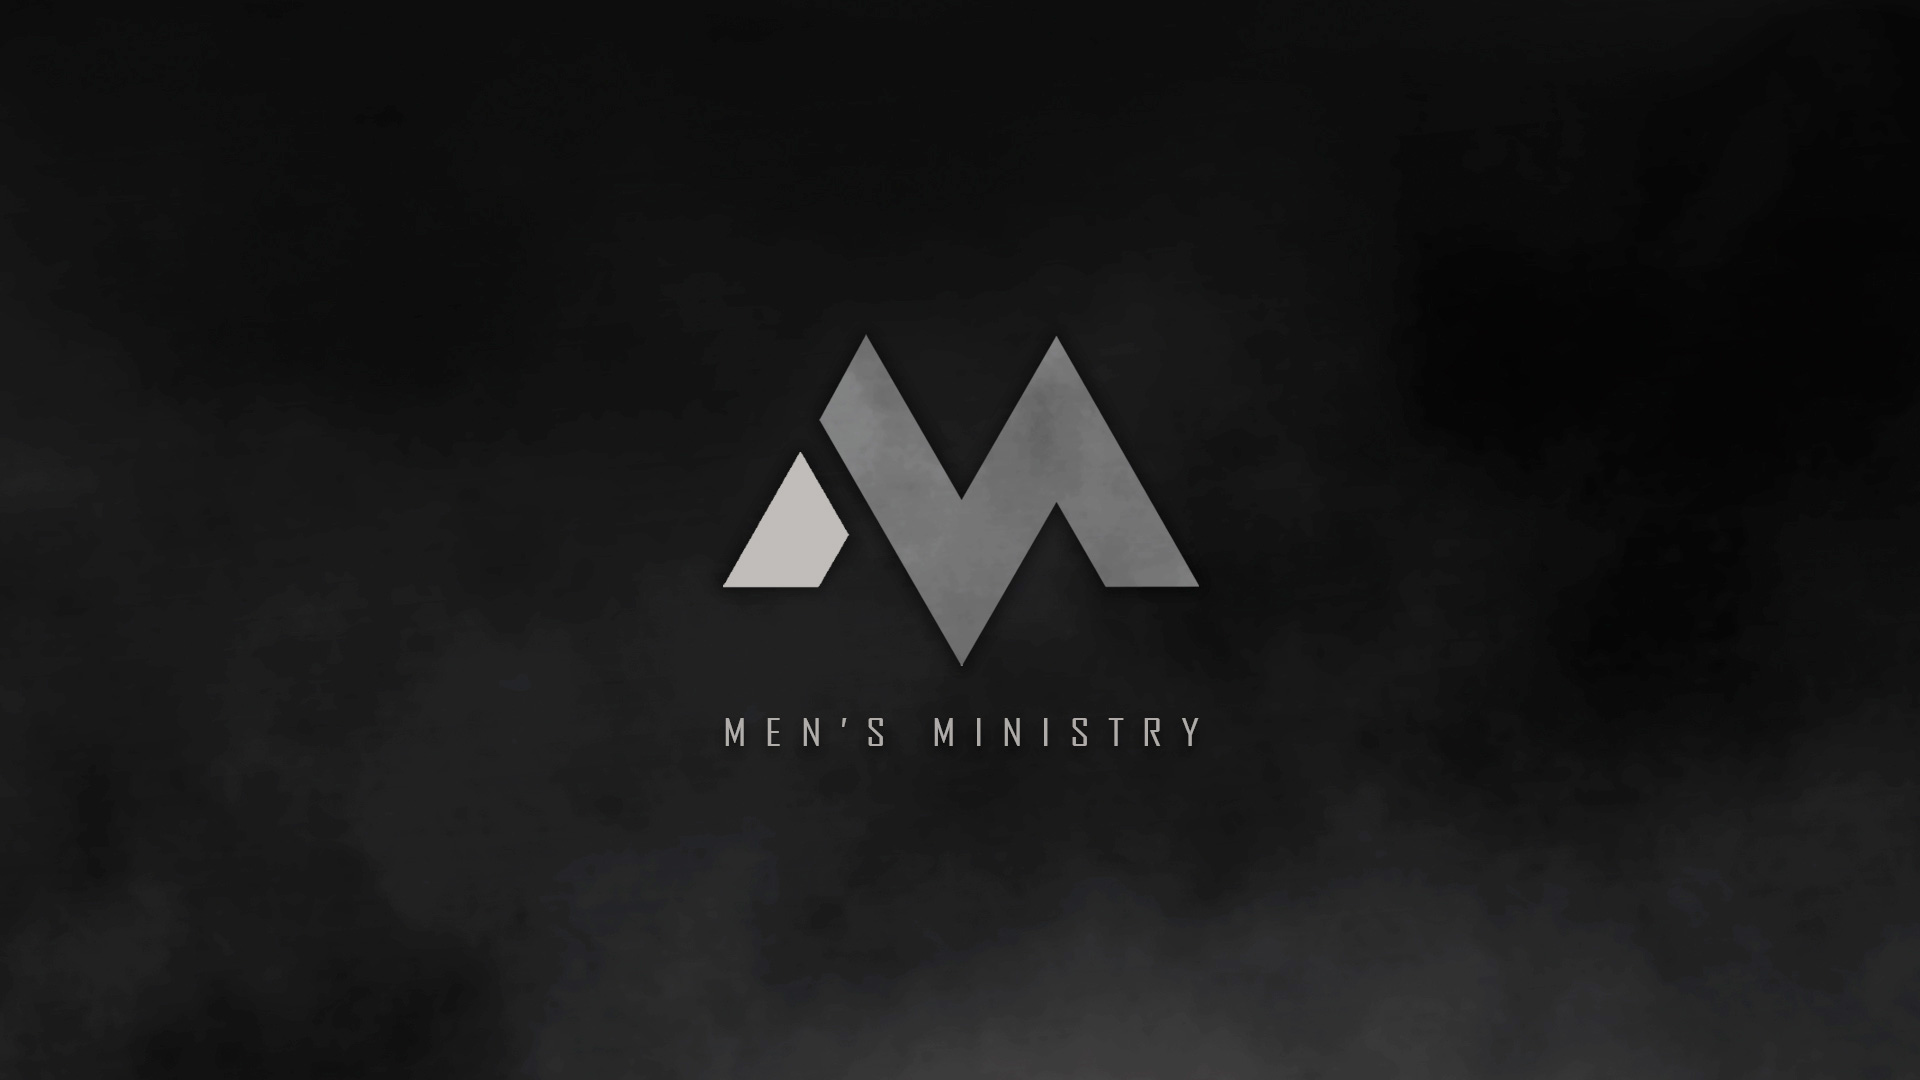 8 Tips for Designing Your Ministry's Logo - Women's Ministry Toolbox